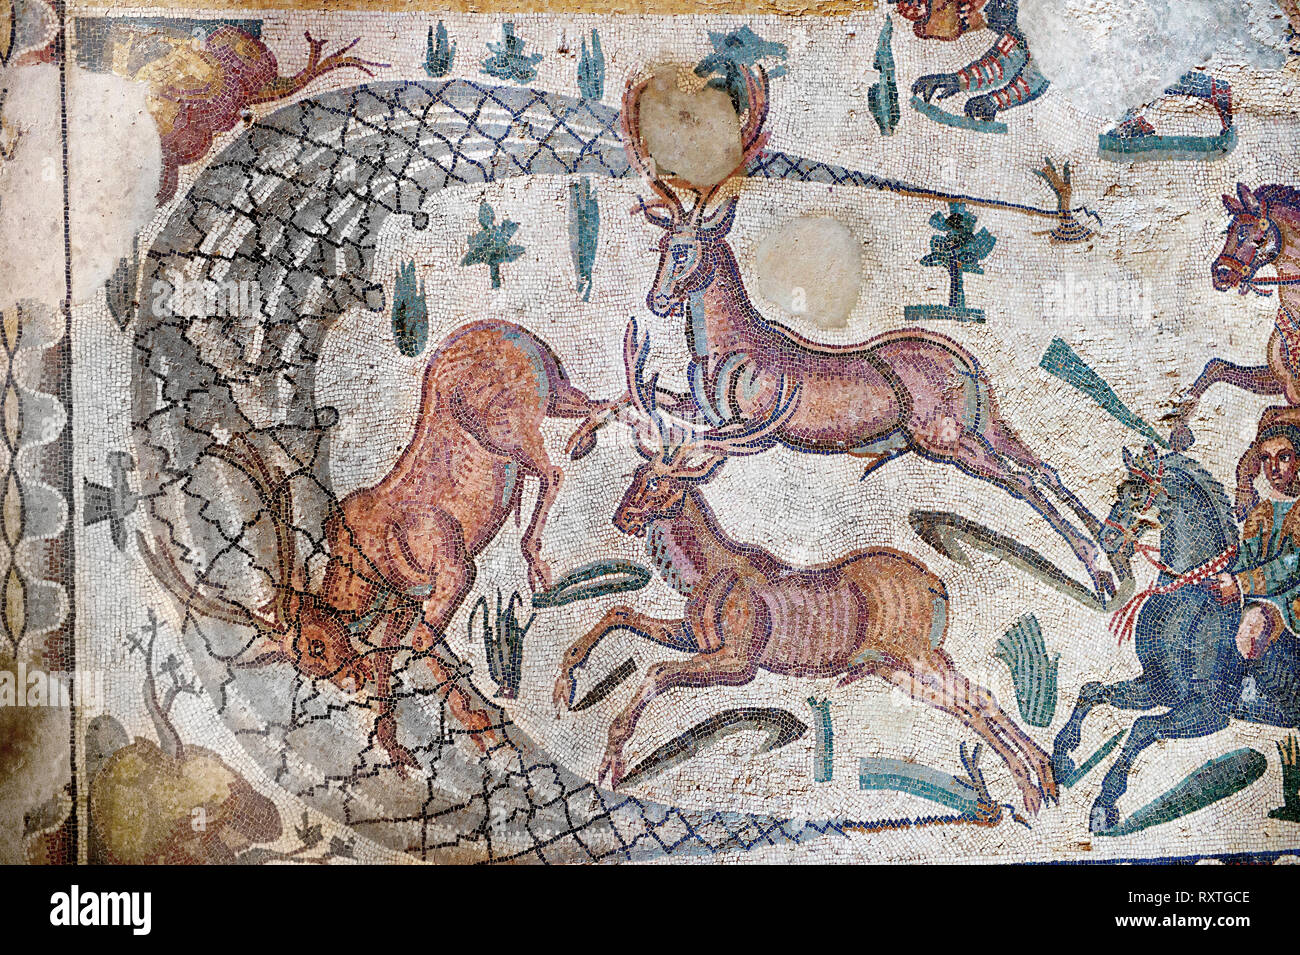 Hunter driving deer into a net from the Room of The Small Hunt, no 25 - Roman mosaics at the Villa Romana del Casale which containis the richest, larg Stock Photo